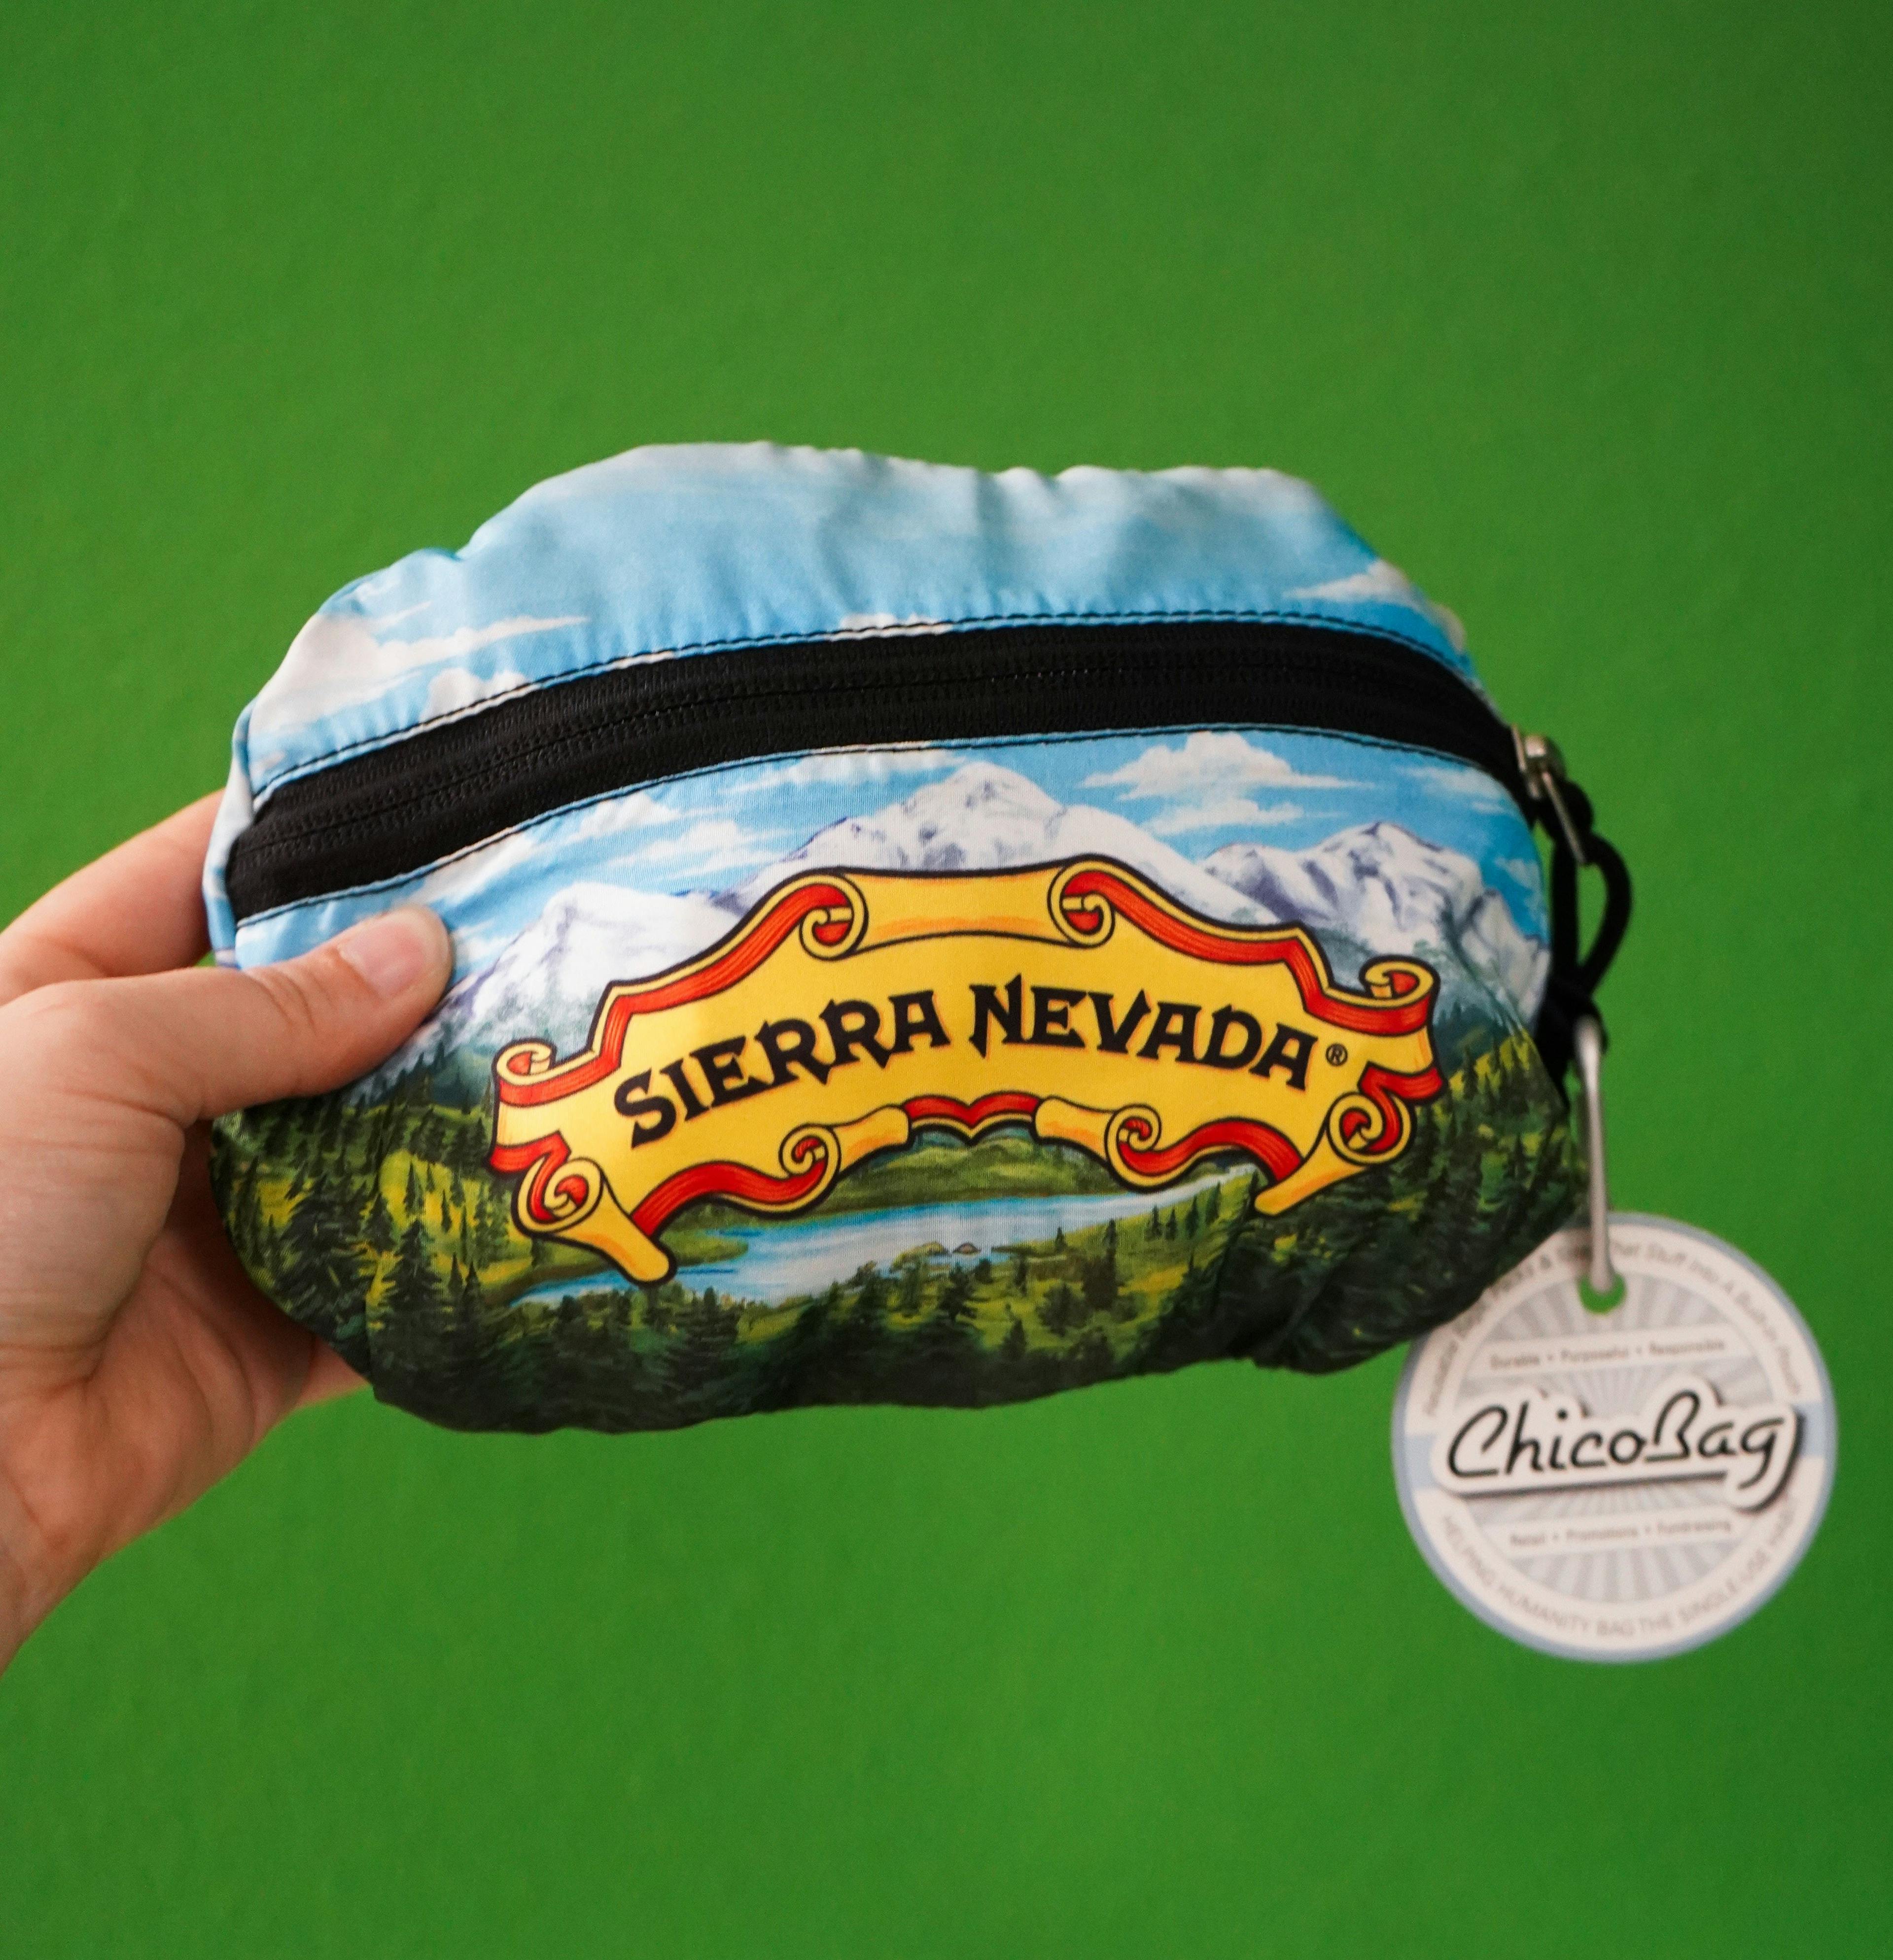 A view of the Sierra Nevada X ChicoBag travel pack tucked into its zipper pouch